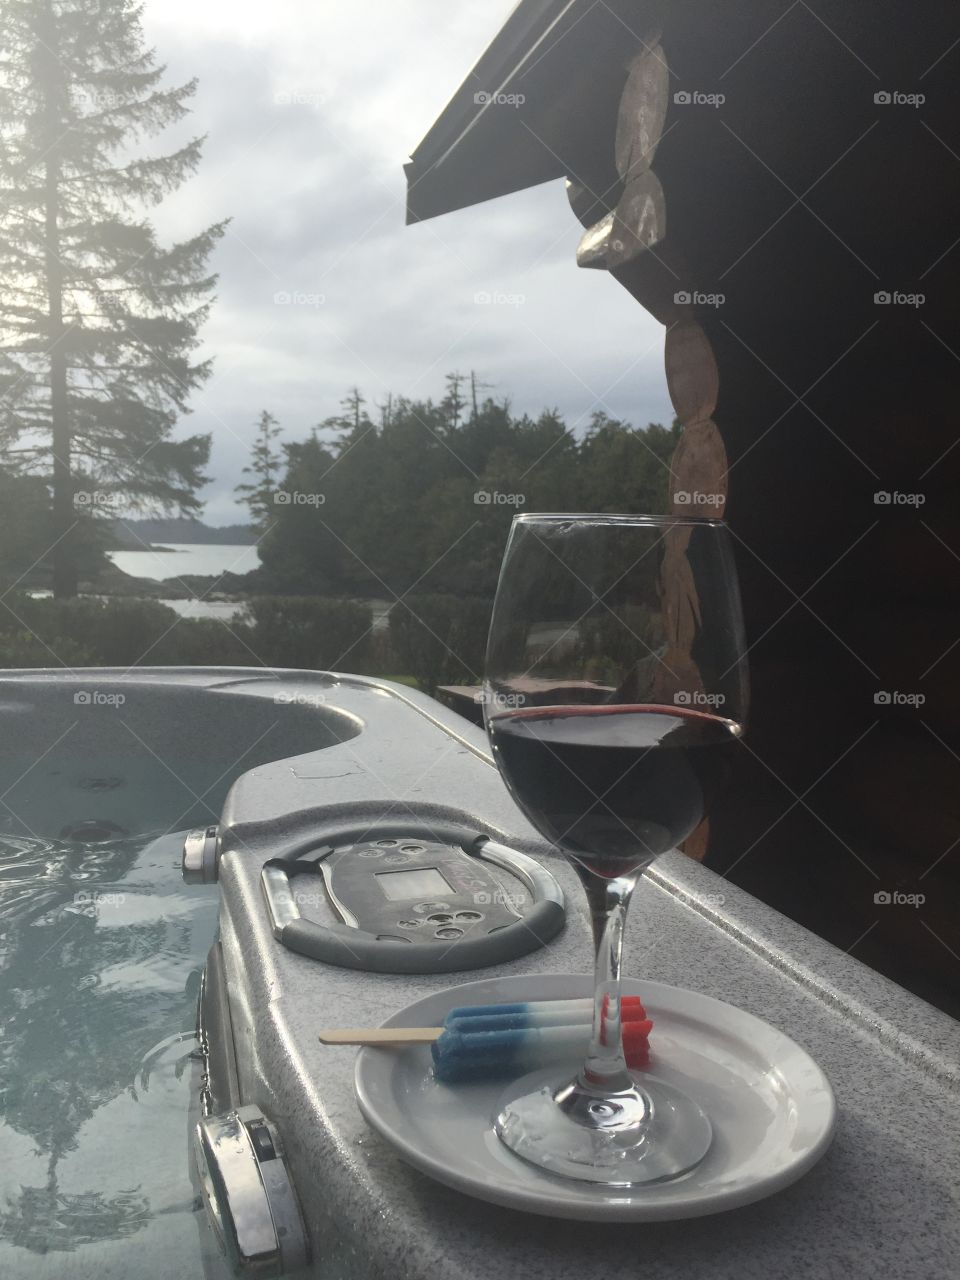 Sitting in an outdoor hot tub enjoying a view of the coastline, ocean, secluded inlet, windswept trees, all while enjoying the perfect pairing of a glass of red wine with a popsicle!